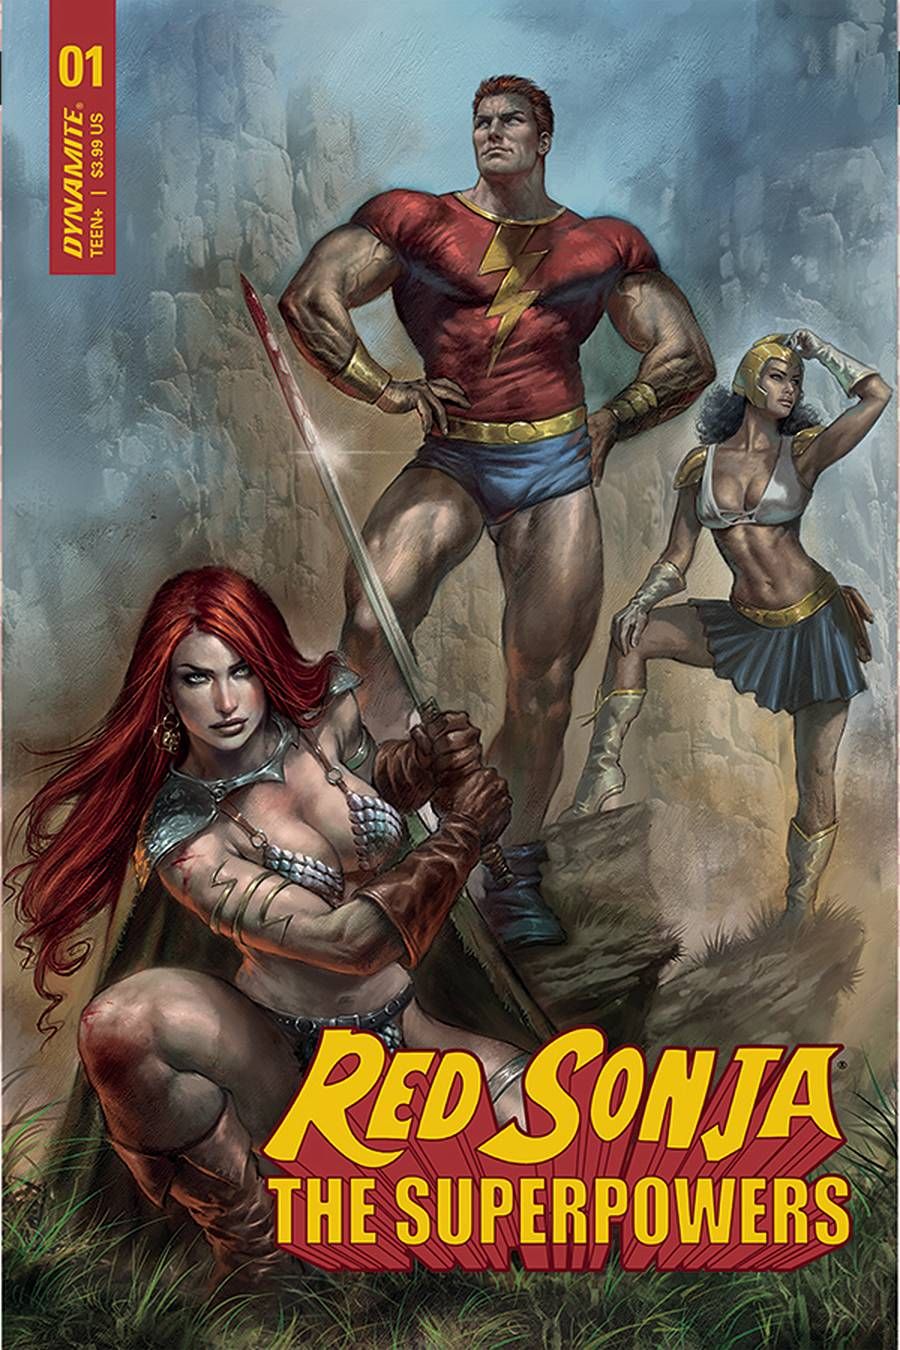 Red Sonja: The Superpowers #1 Comic